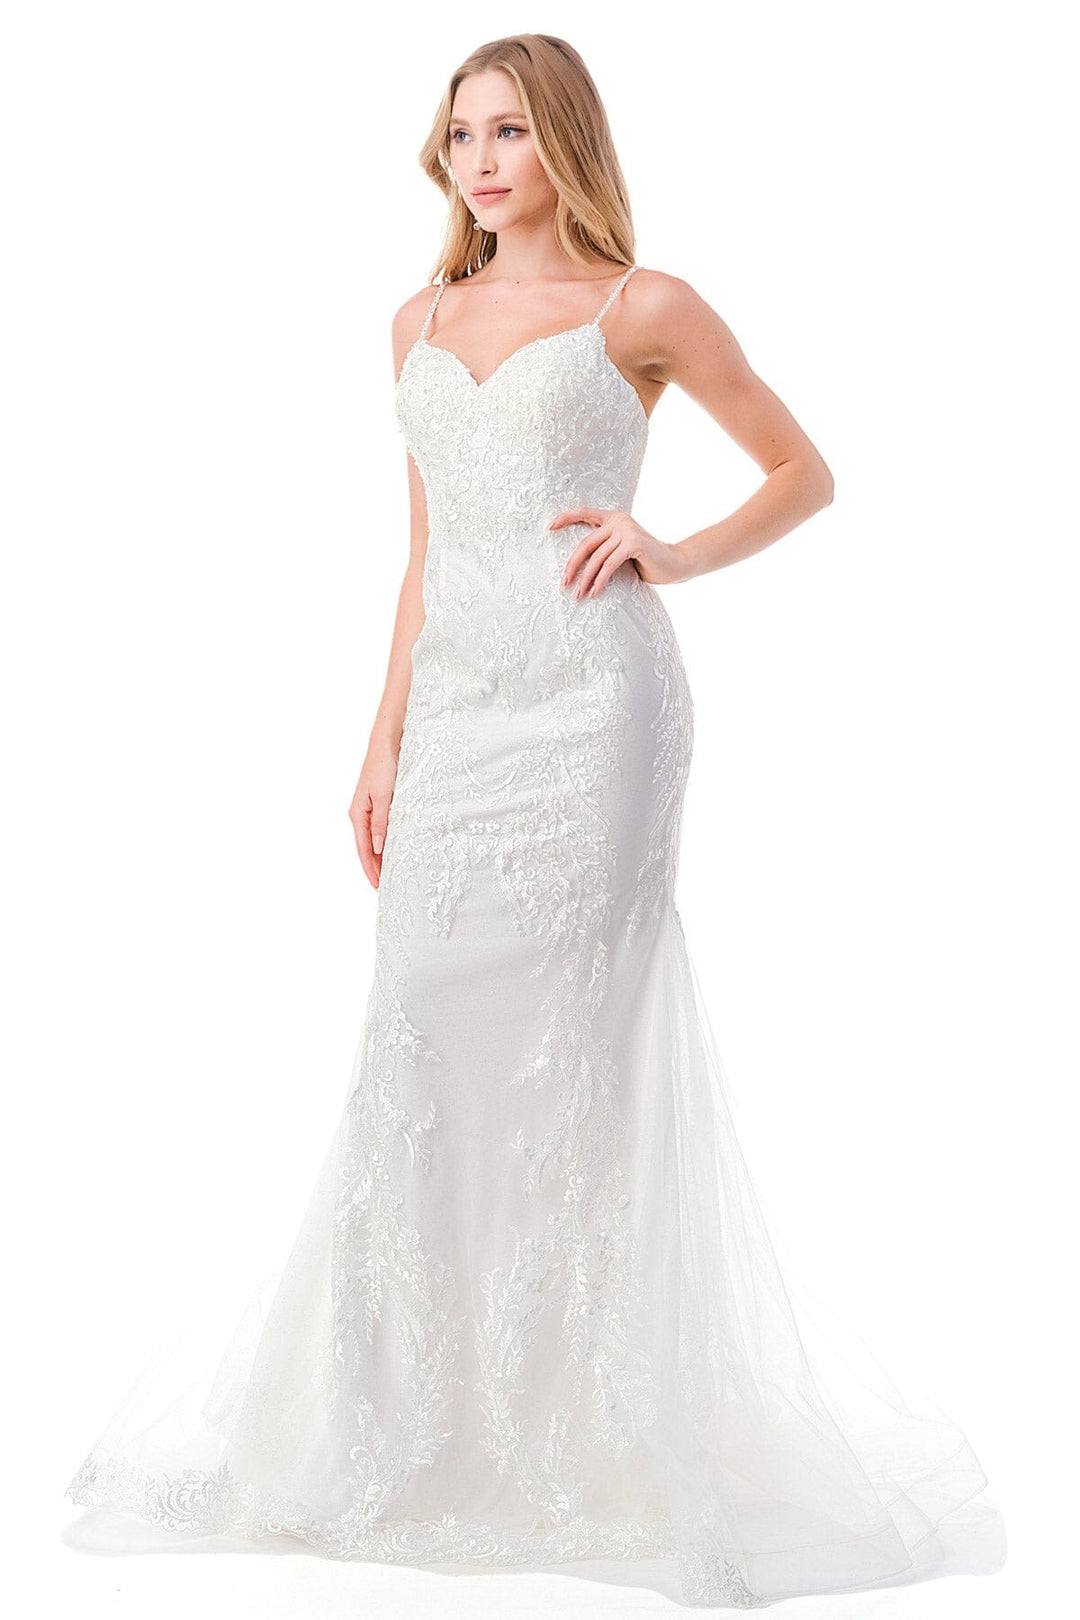 Embroidered Sleeveless Mermaid Bridal Gown by Coya MS0023